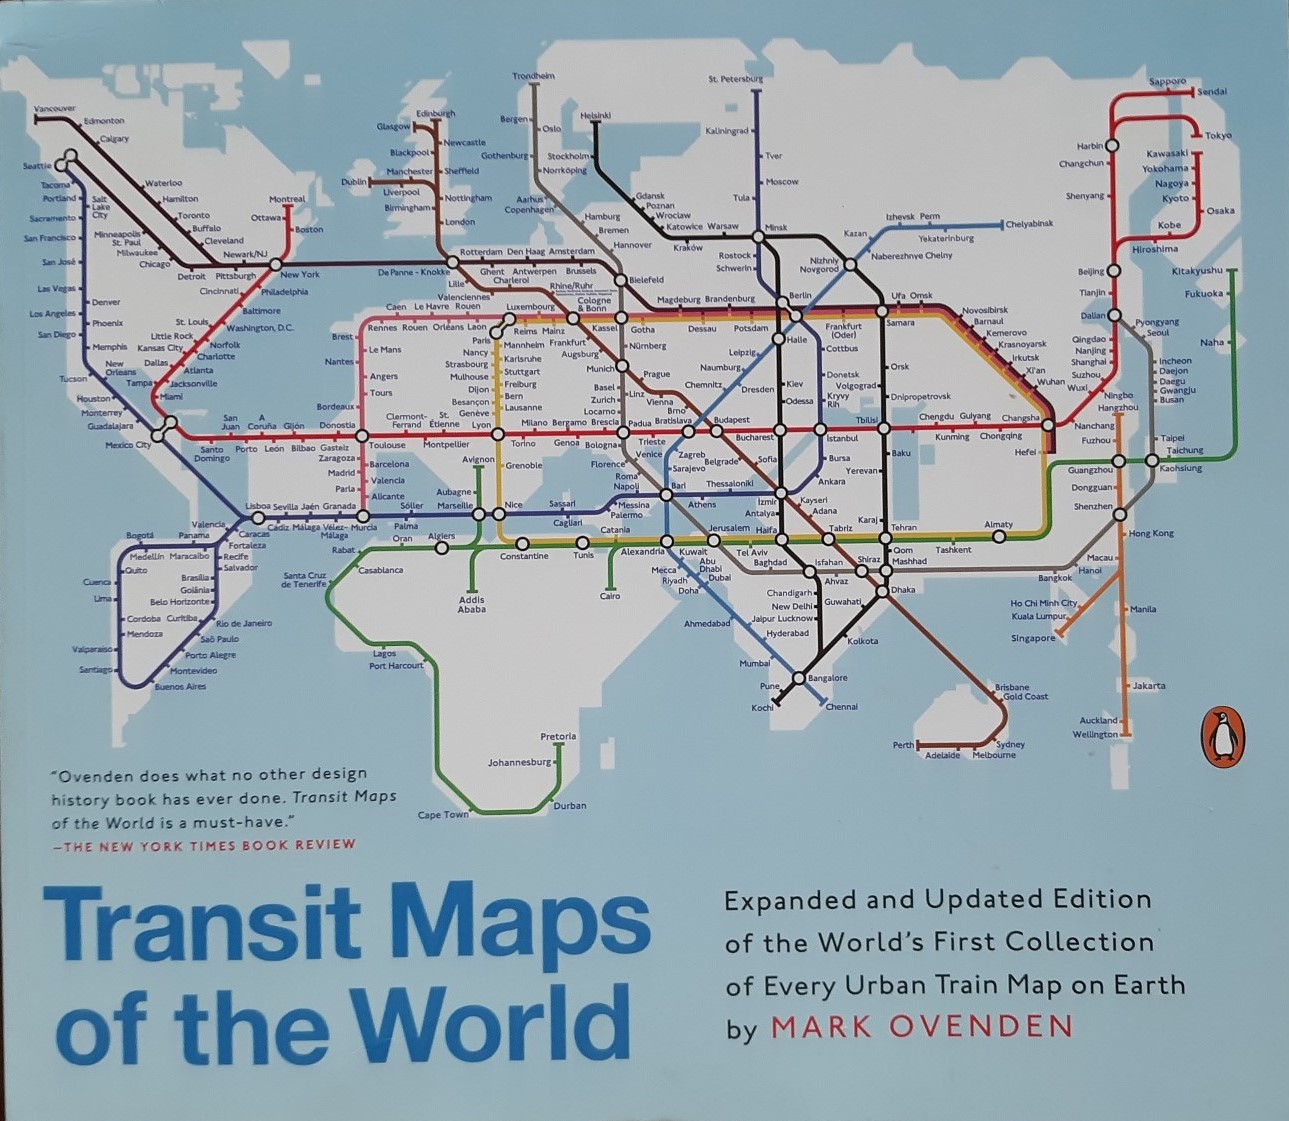 Transit Maps of the World Every Urban Train Map on Earth